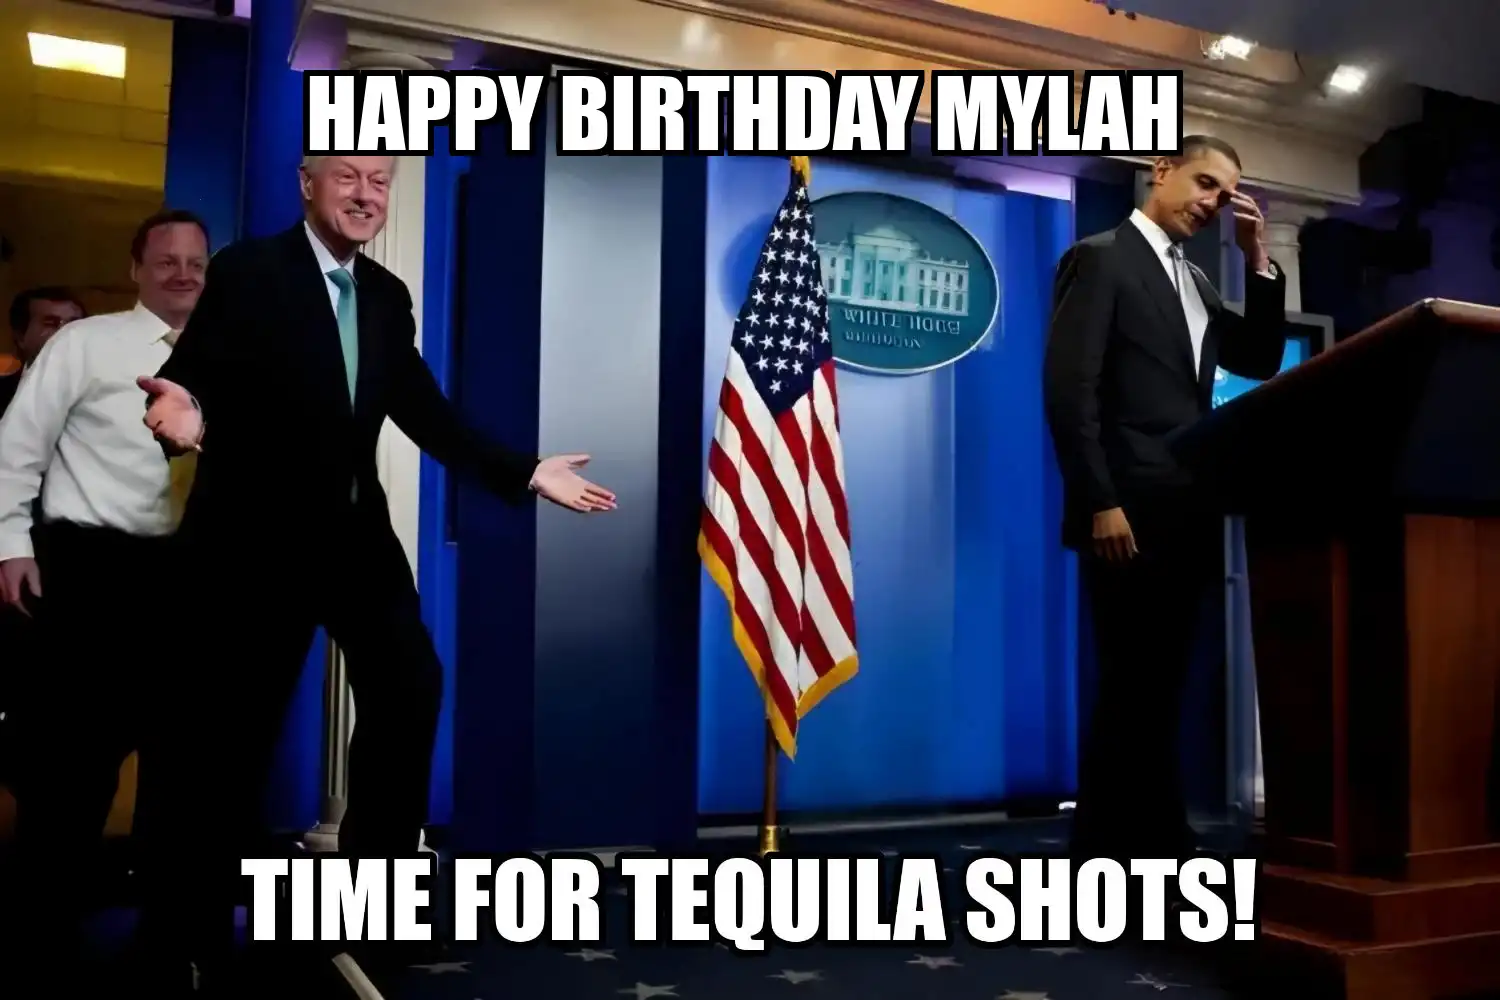 Happy Birthday Mylah Time For Tequila Shots Memes